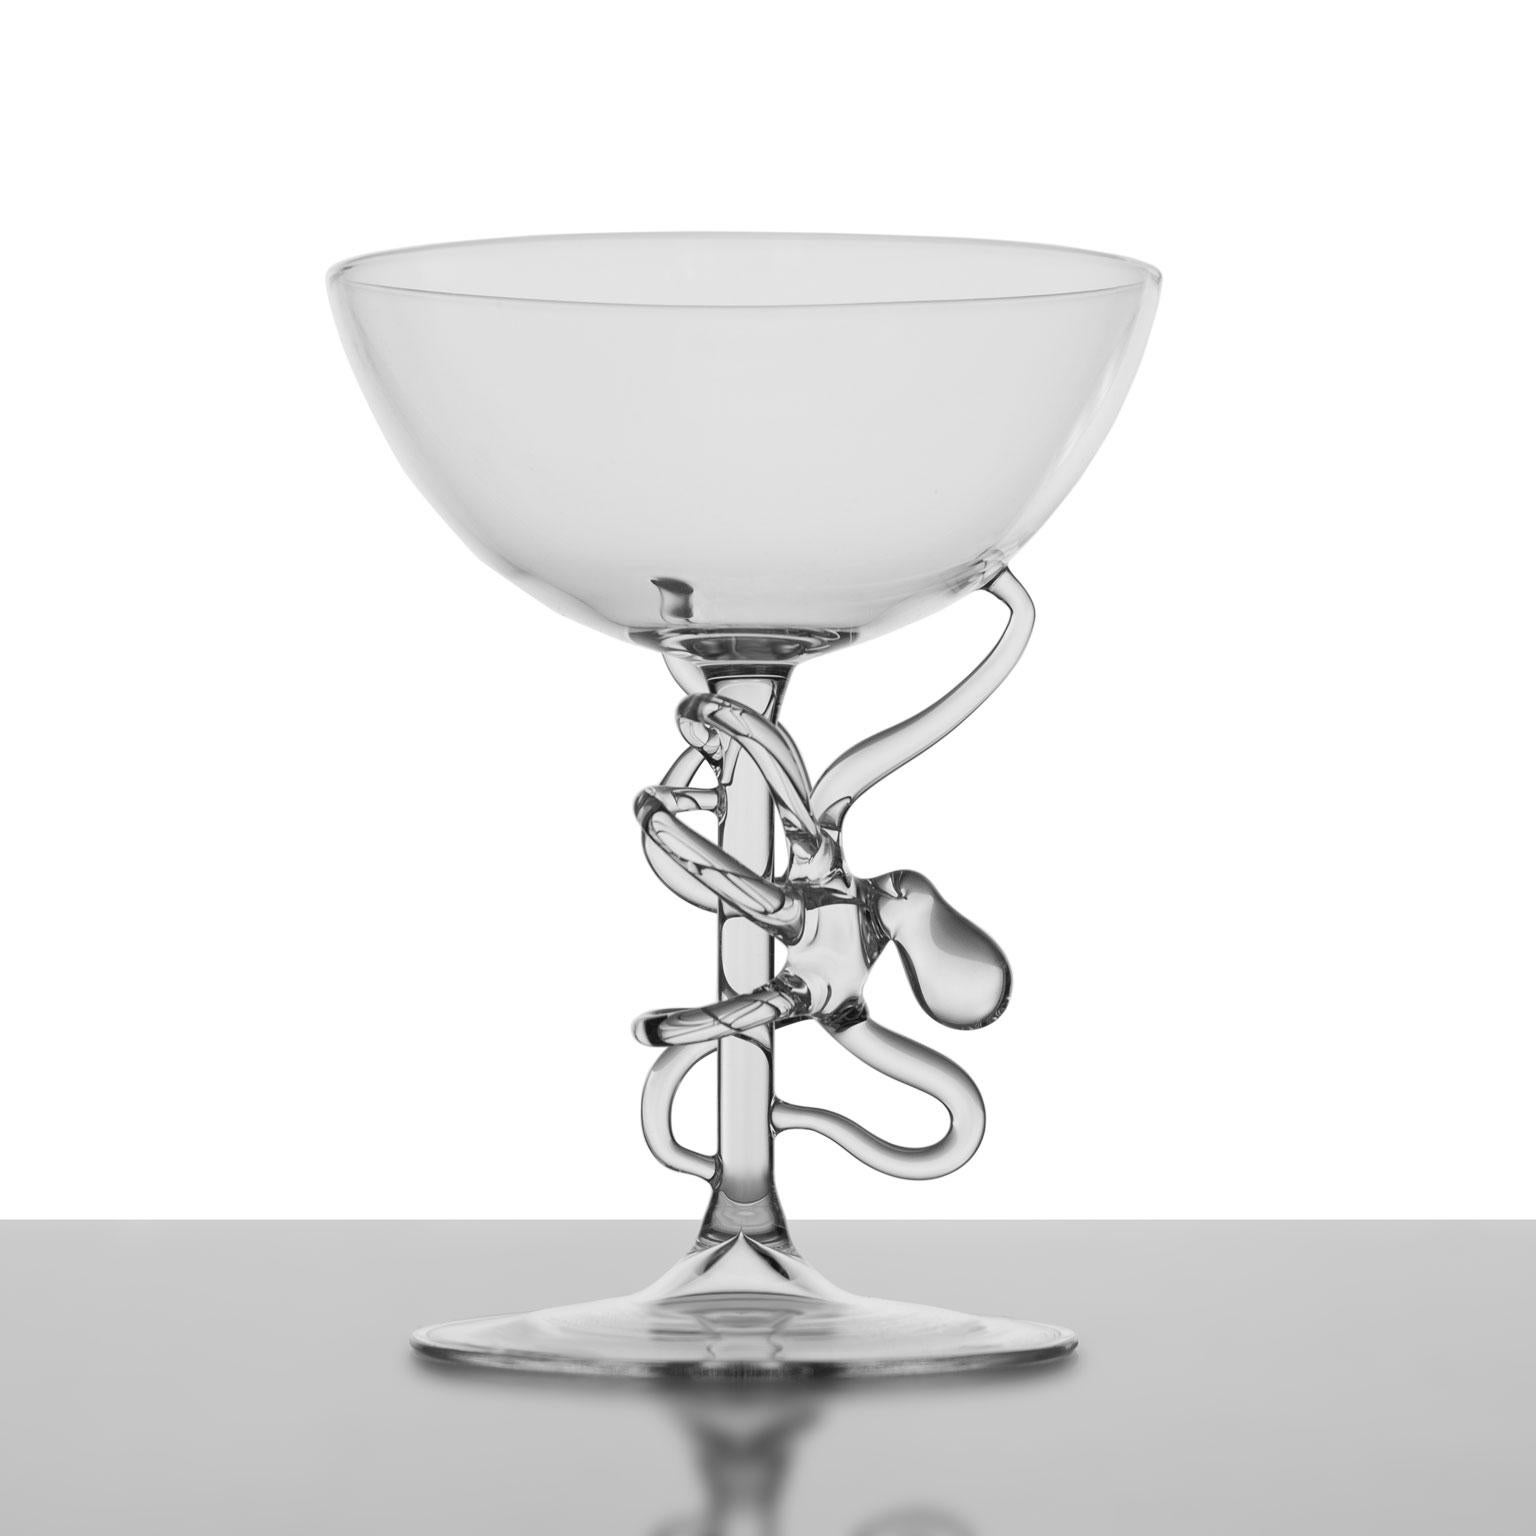 'Polpo Manhattan Glass'
A Hand-Blown Manhattan Glass by Simone Crestani
Polpo Manhattan Glass is one of the pieces from the Polpo Collection.

The enveloping elegance of the Polpo Collection may make you believe that the animal is really